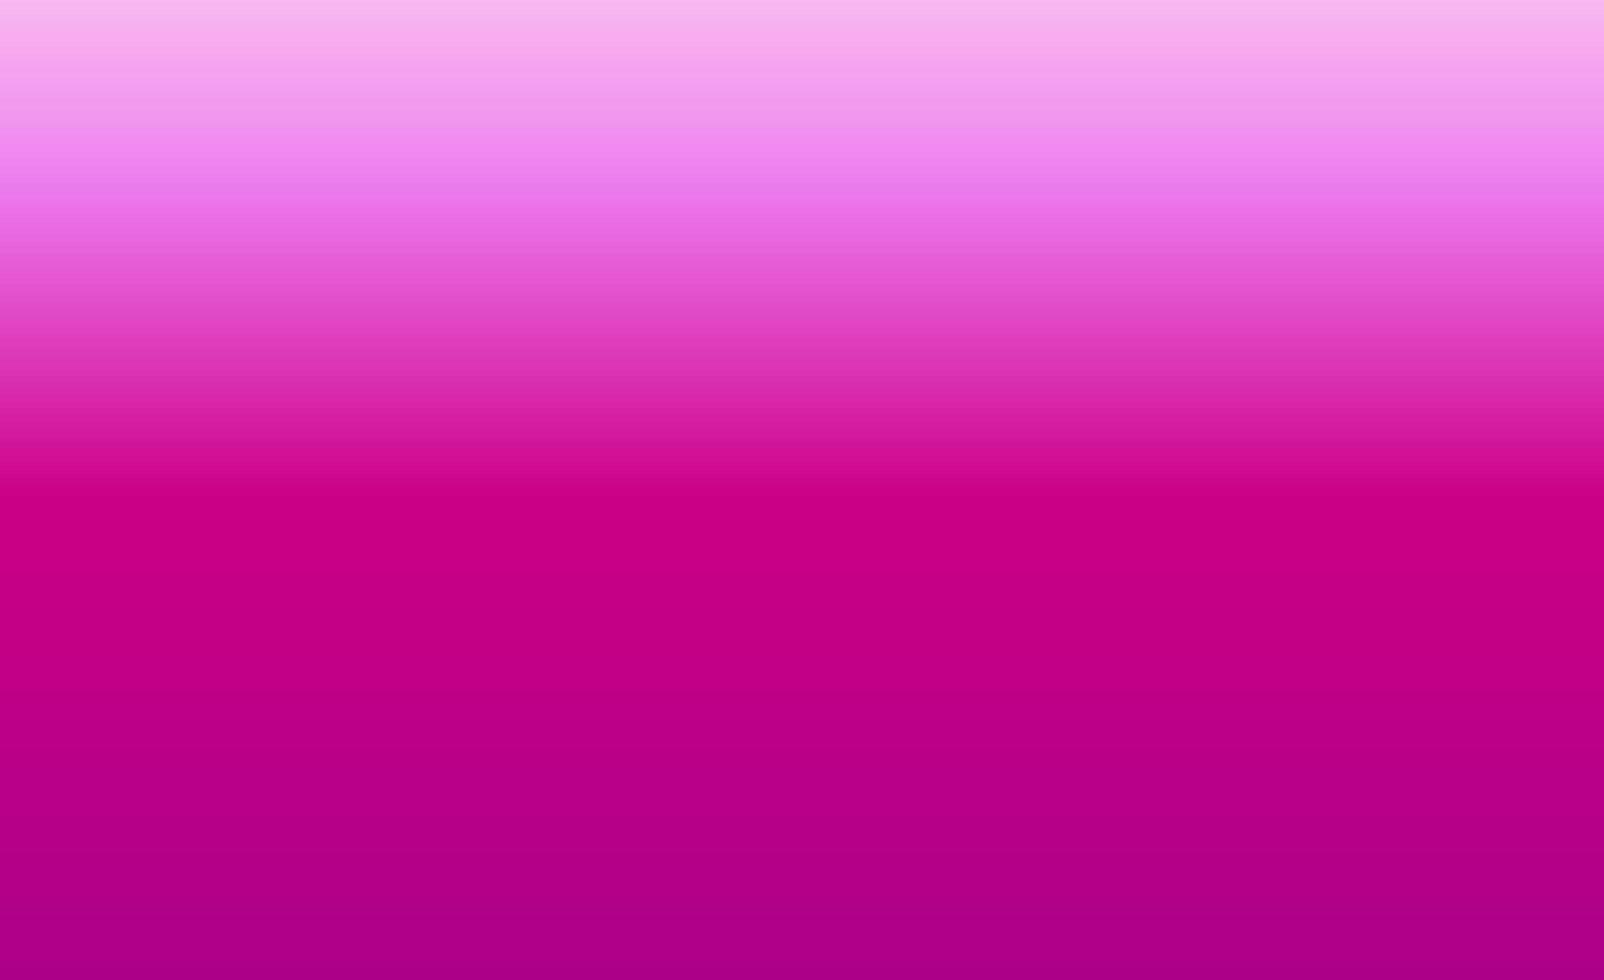 gradient texture wallpaper abstract pink gradient as illustration background photo